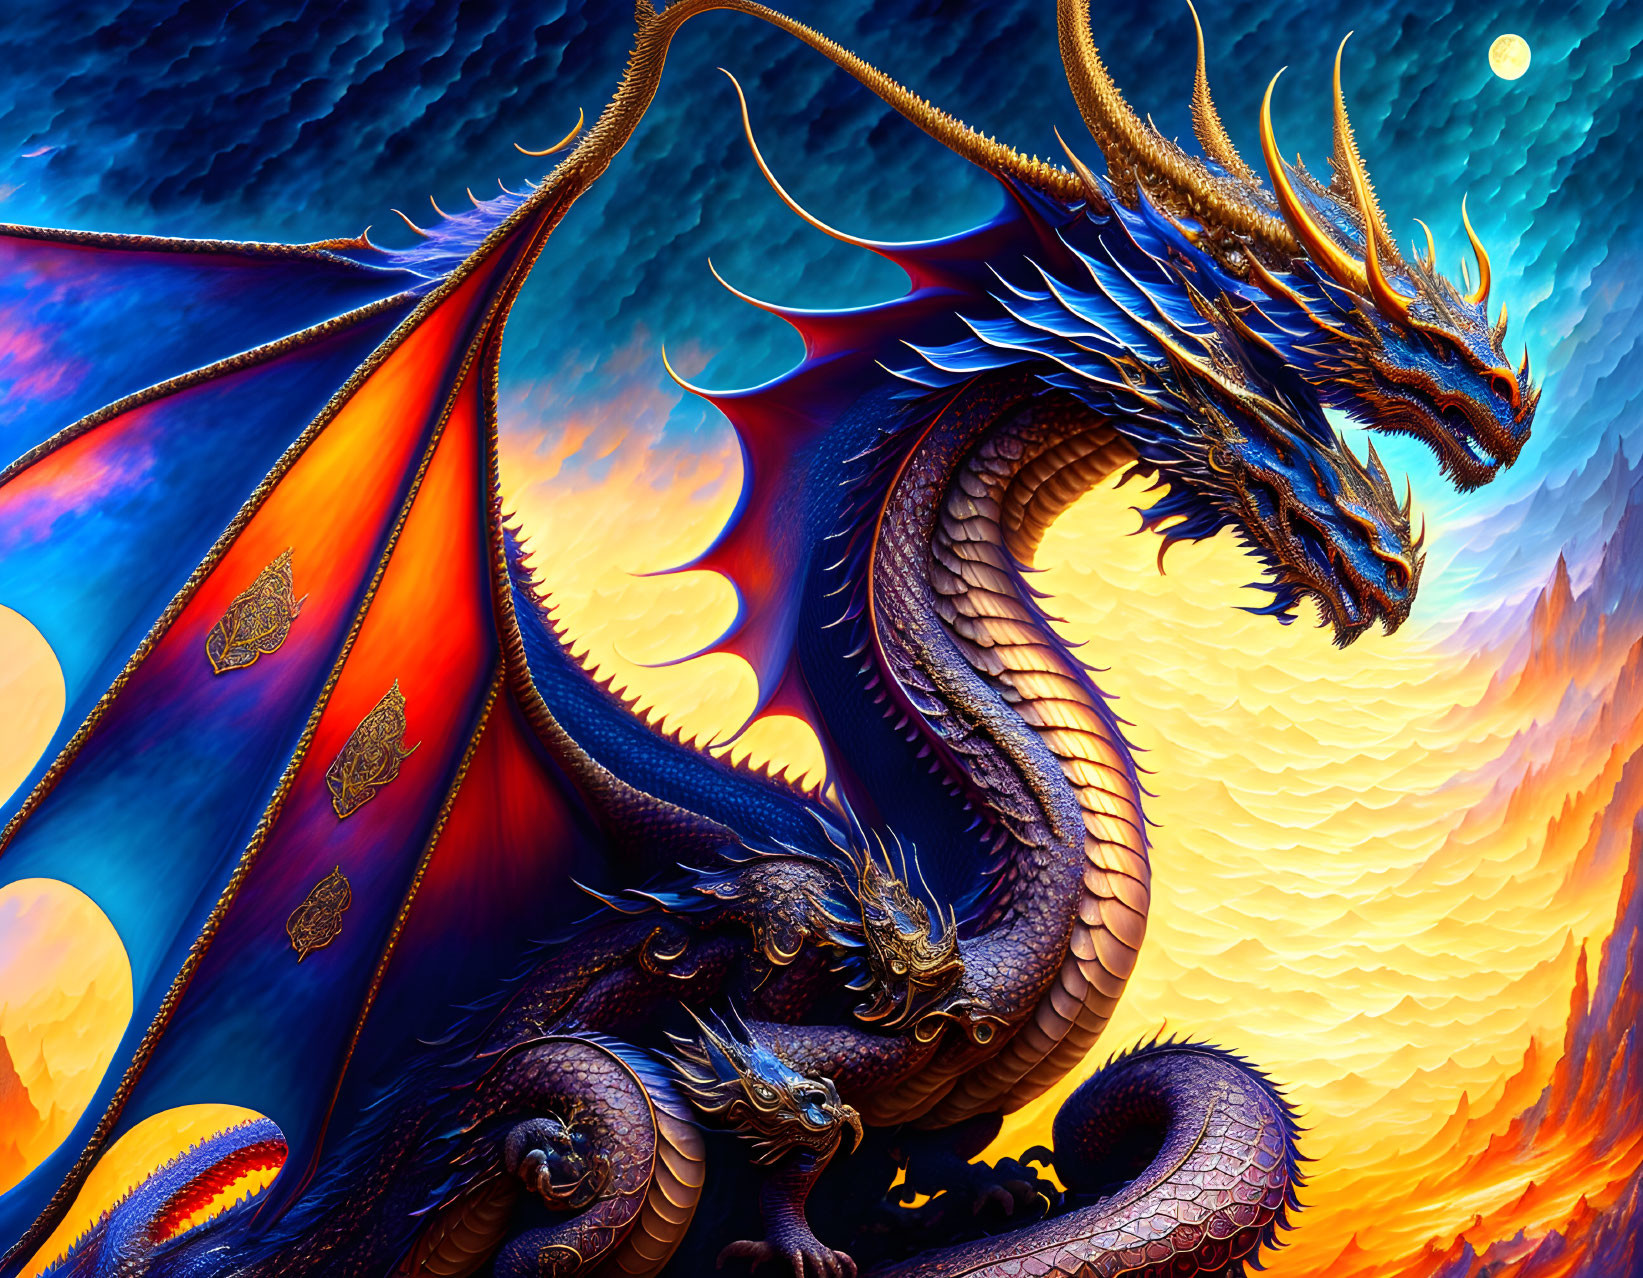 Detailed Dragon Artwork with Majestic Wings and Colorful Sky